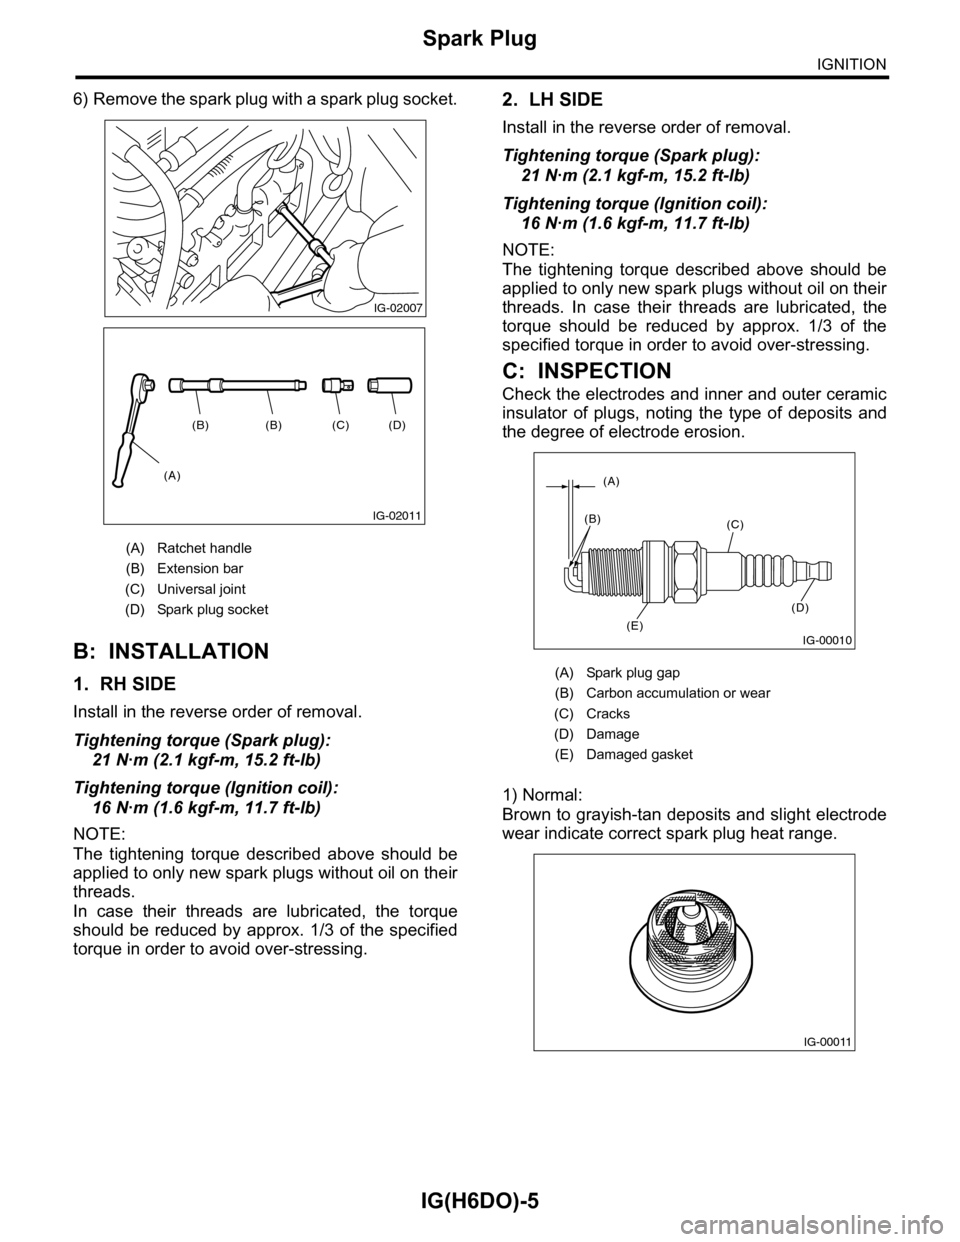 SUBARU TRIBECA 2009 1.G Service Owners Manual IG(H6DO)-5
Spark Plug
IGNITION
6) Remove the spark plug with a spark plug socket.
B: INSTALLATION
1. RH SIDE
Install in the reverse order of removal.
Tightening torque (Spark plug):
21 N·m (2.1 kgf-m